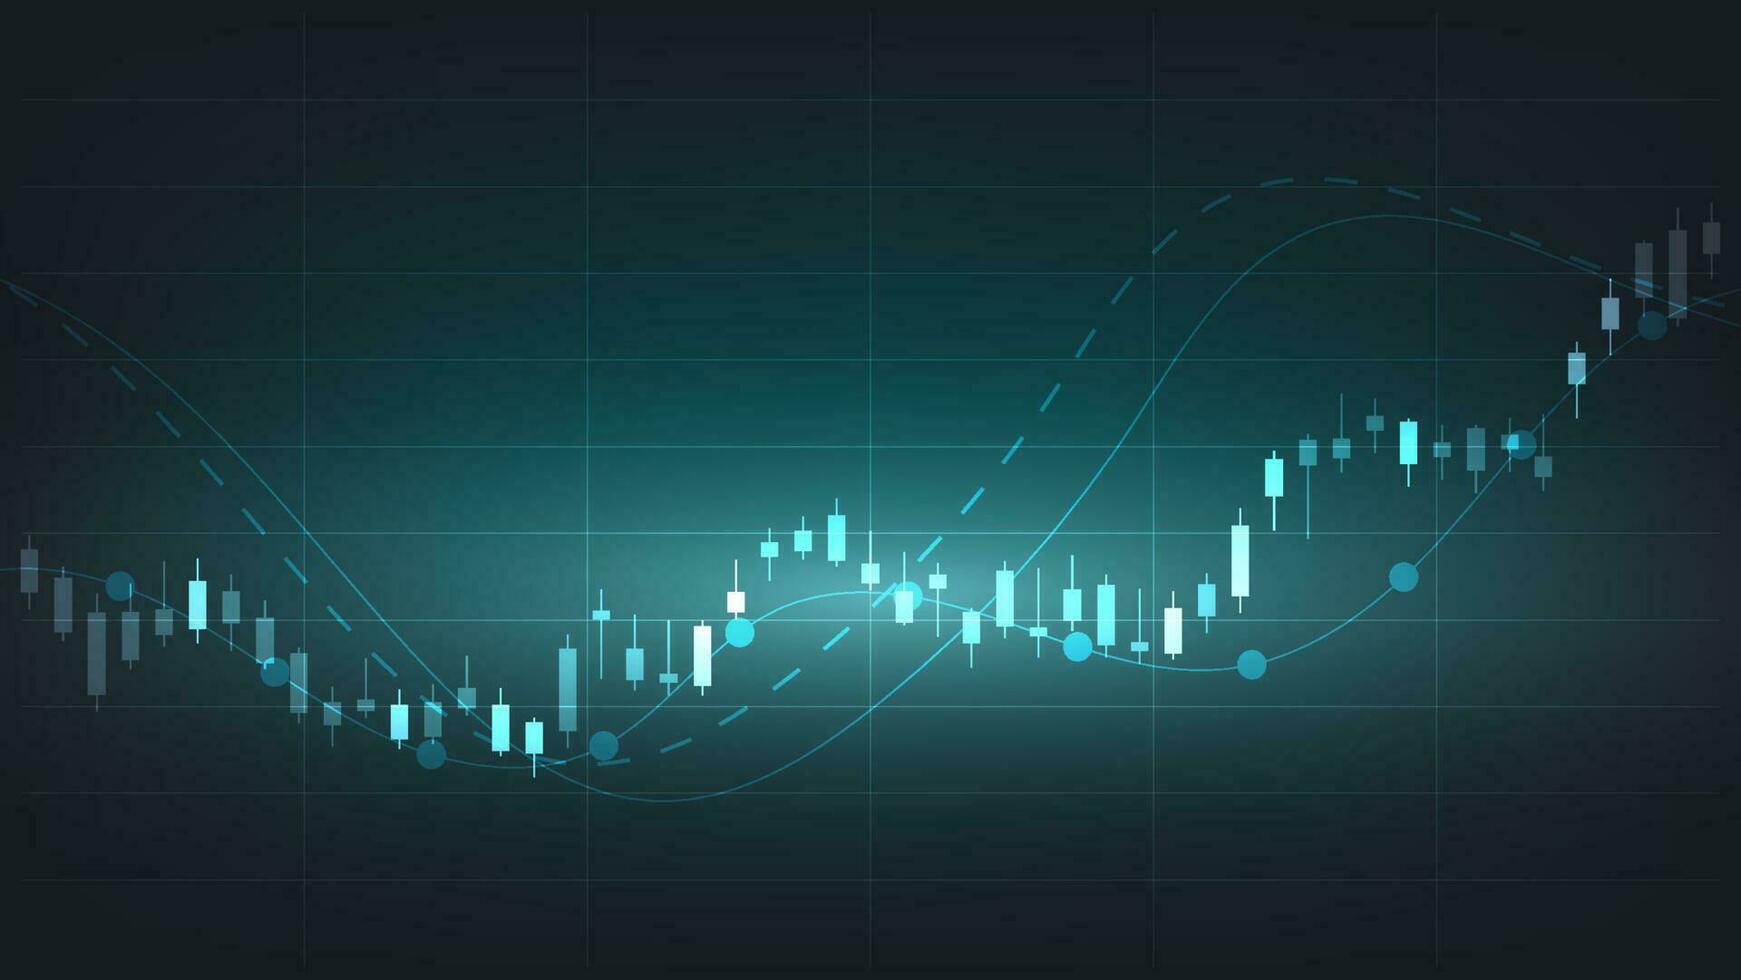 finance background. candlesticks chart on dark screen. stock market and business investment concept vector